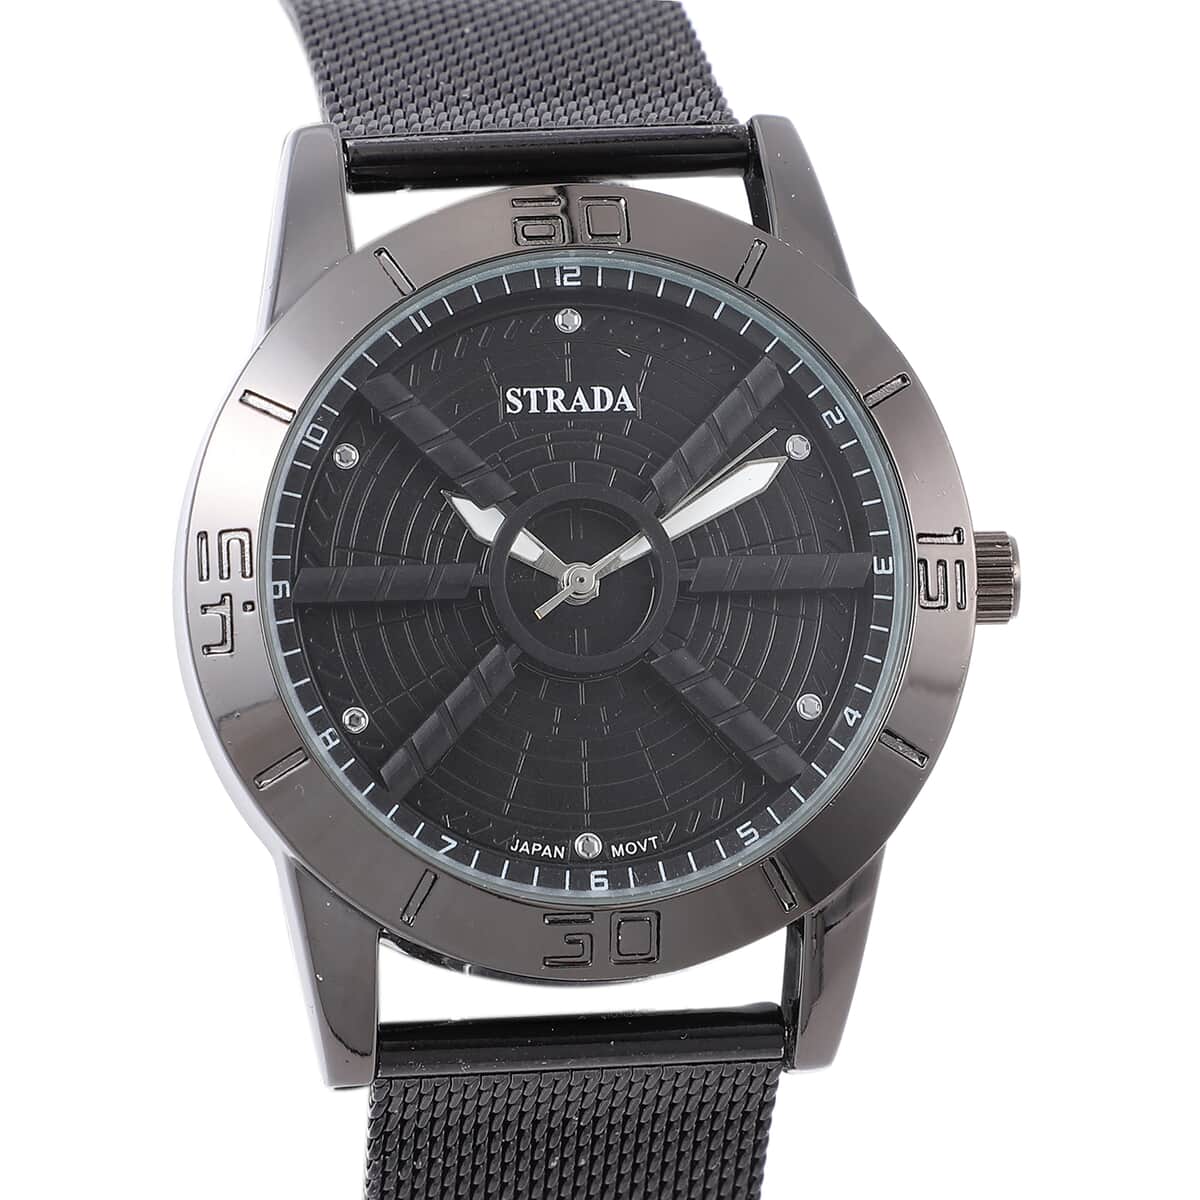 Strada Japanese Movement Water Resistant Watch with Black Dial Stainless Steel Mesh Strap and Back image number 3